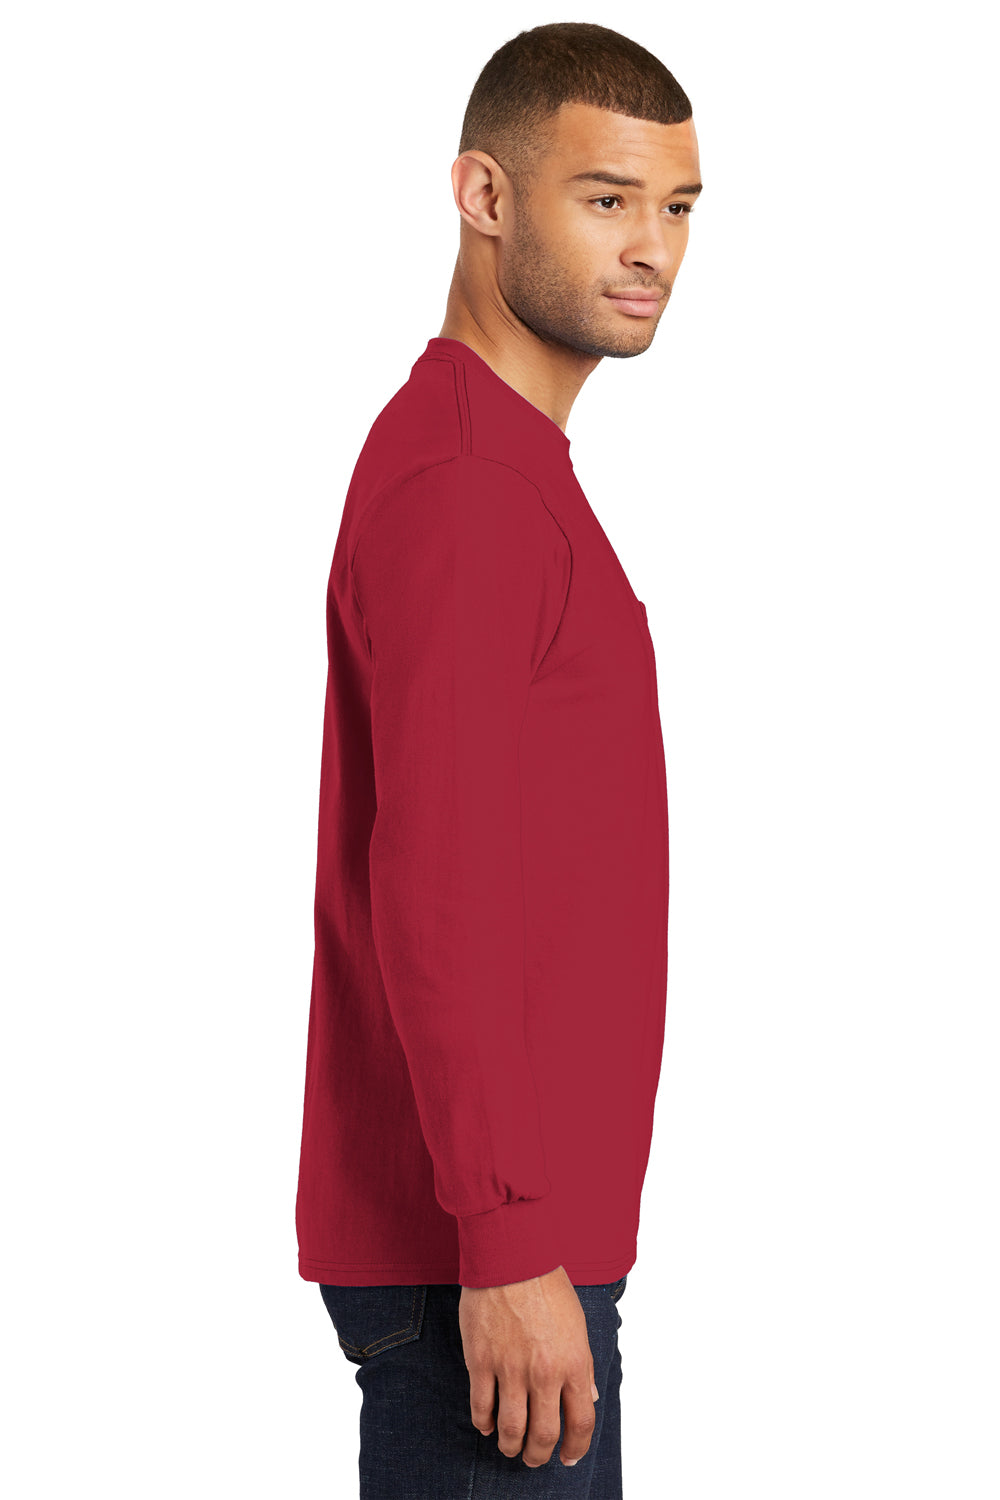 Port & Company PC61LSP Mens Essential Long Sleeve Crewneck T-Shirt w/ Pocket Red Side